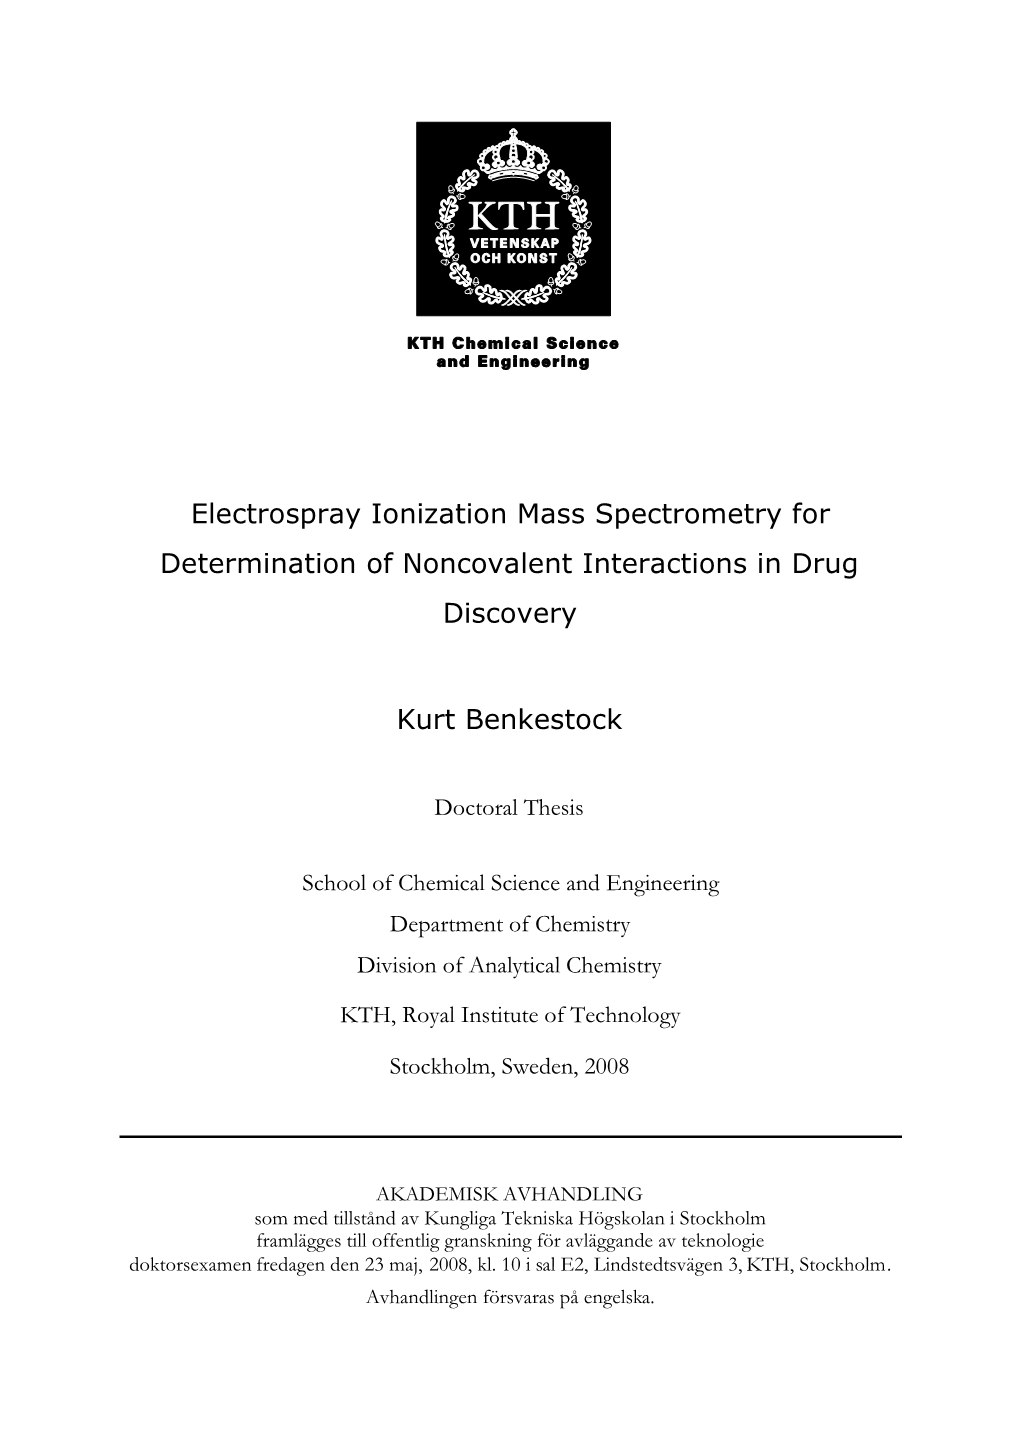 Electrospray Ionization Mass Spectrometry for Determination of Noncovalent Interactions in Drug Discovery Kurt Benkestock